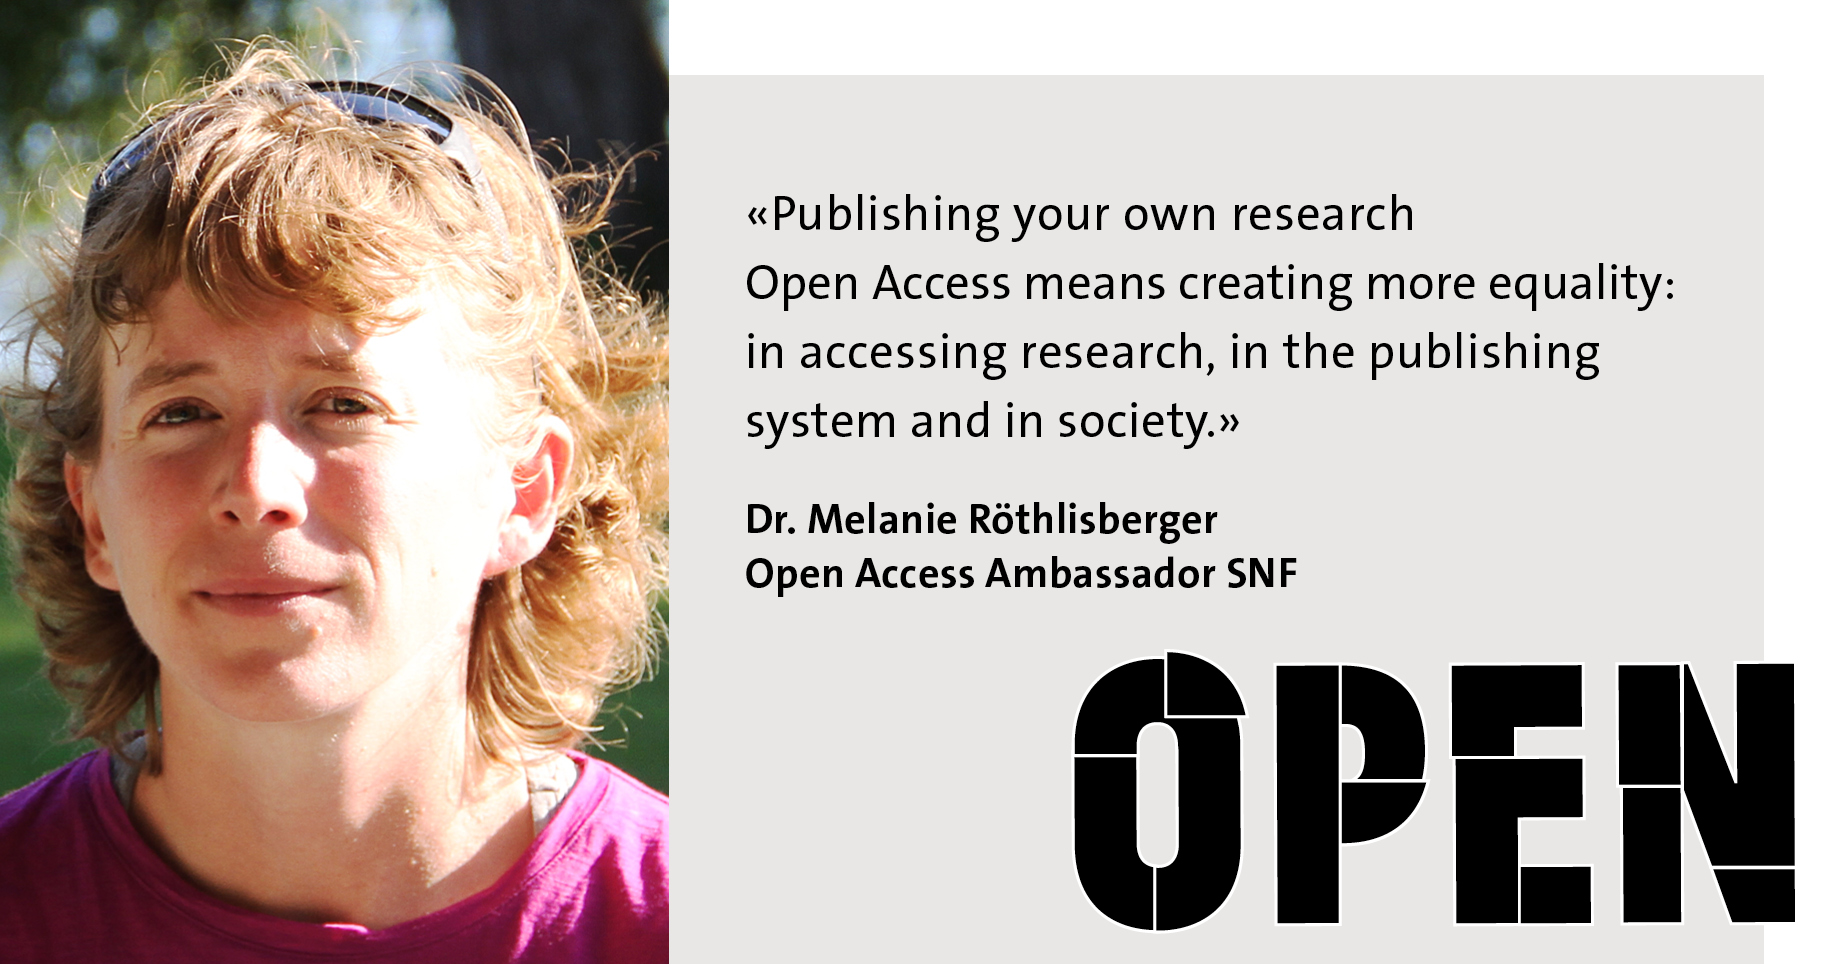 Melanie Röthlisberger, Open Access Ambassador SNF: «Publishing your own research Open Access means creating more equality: in accessing research, in the publishing system and in society. »